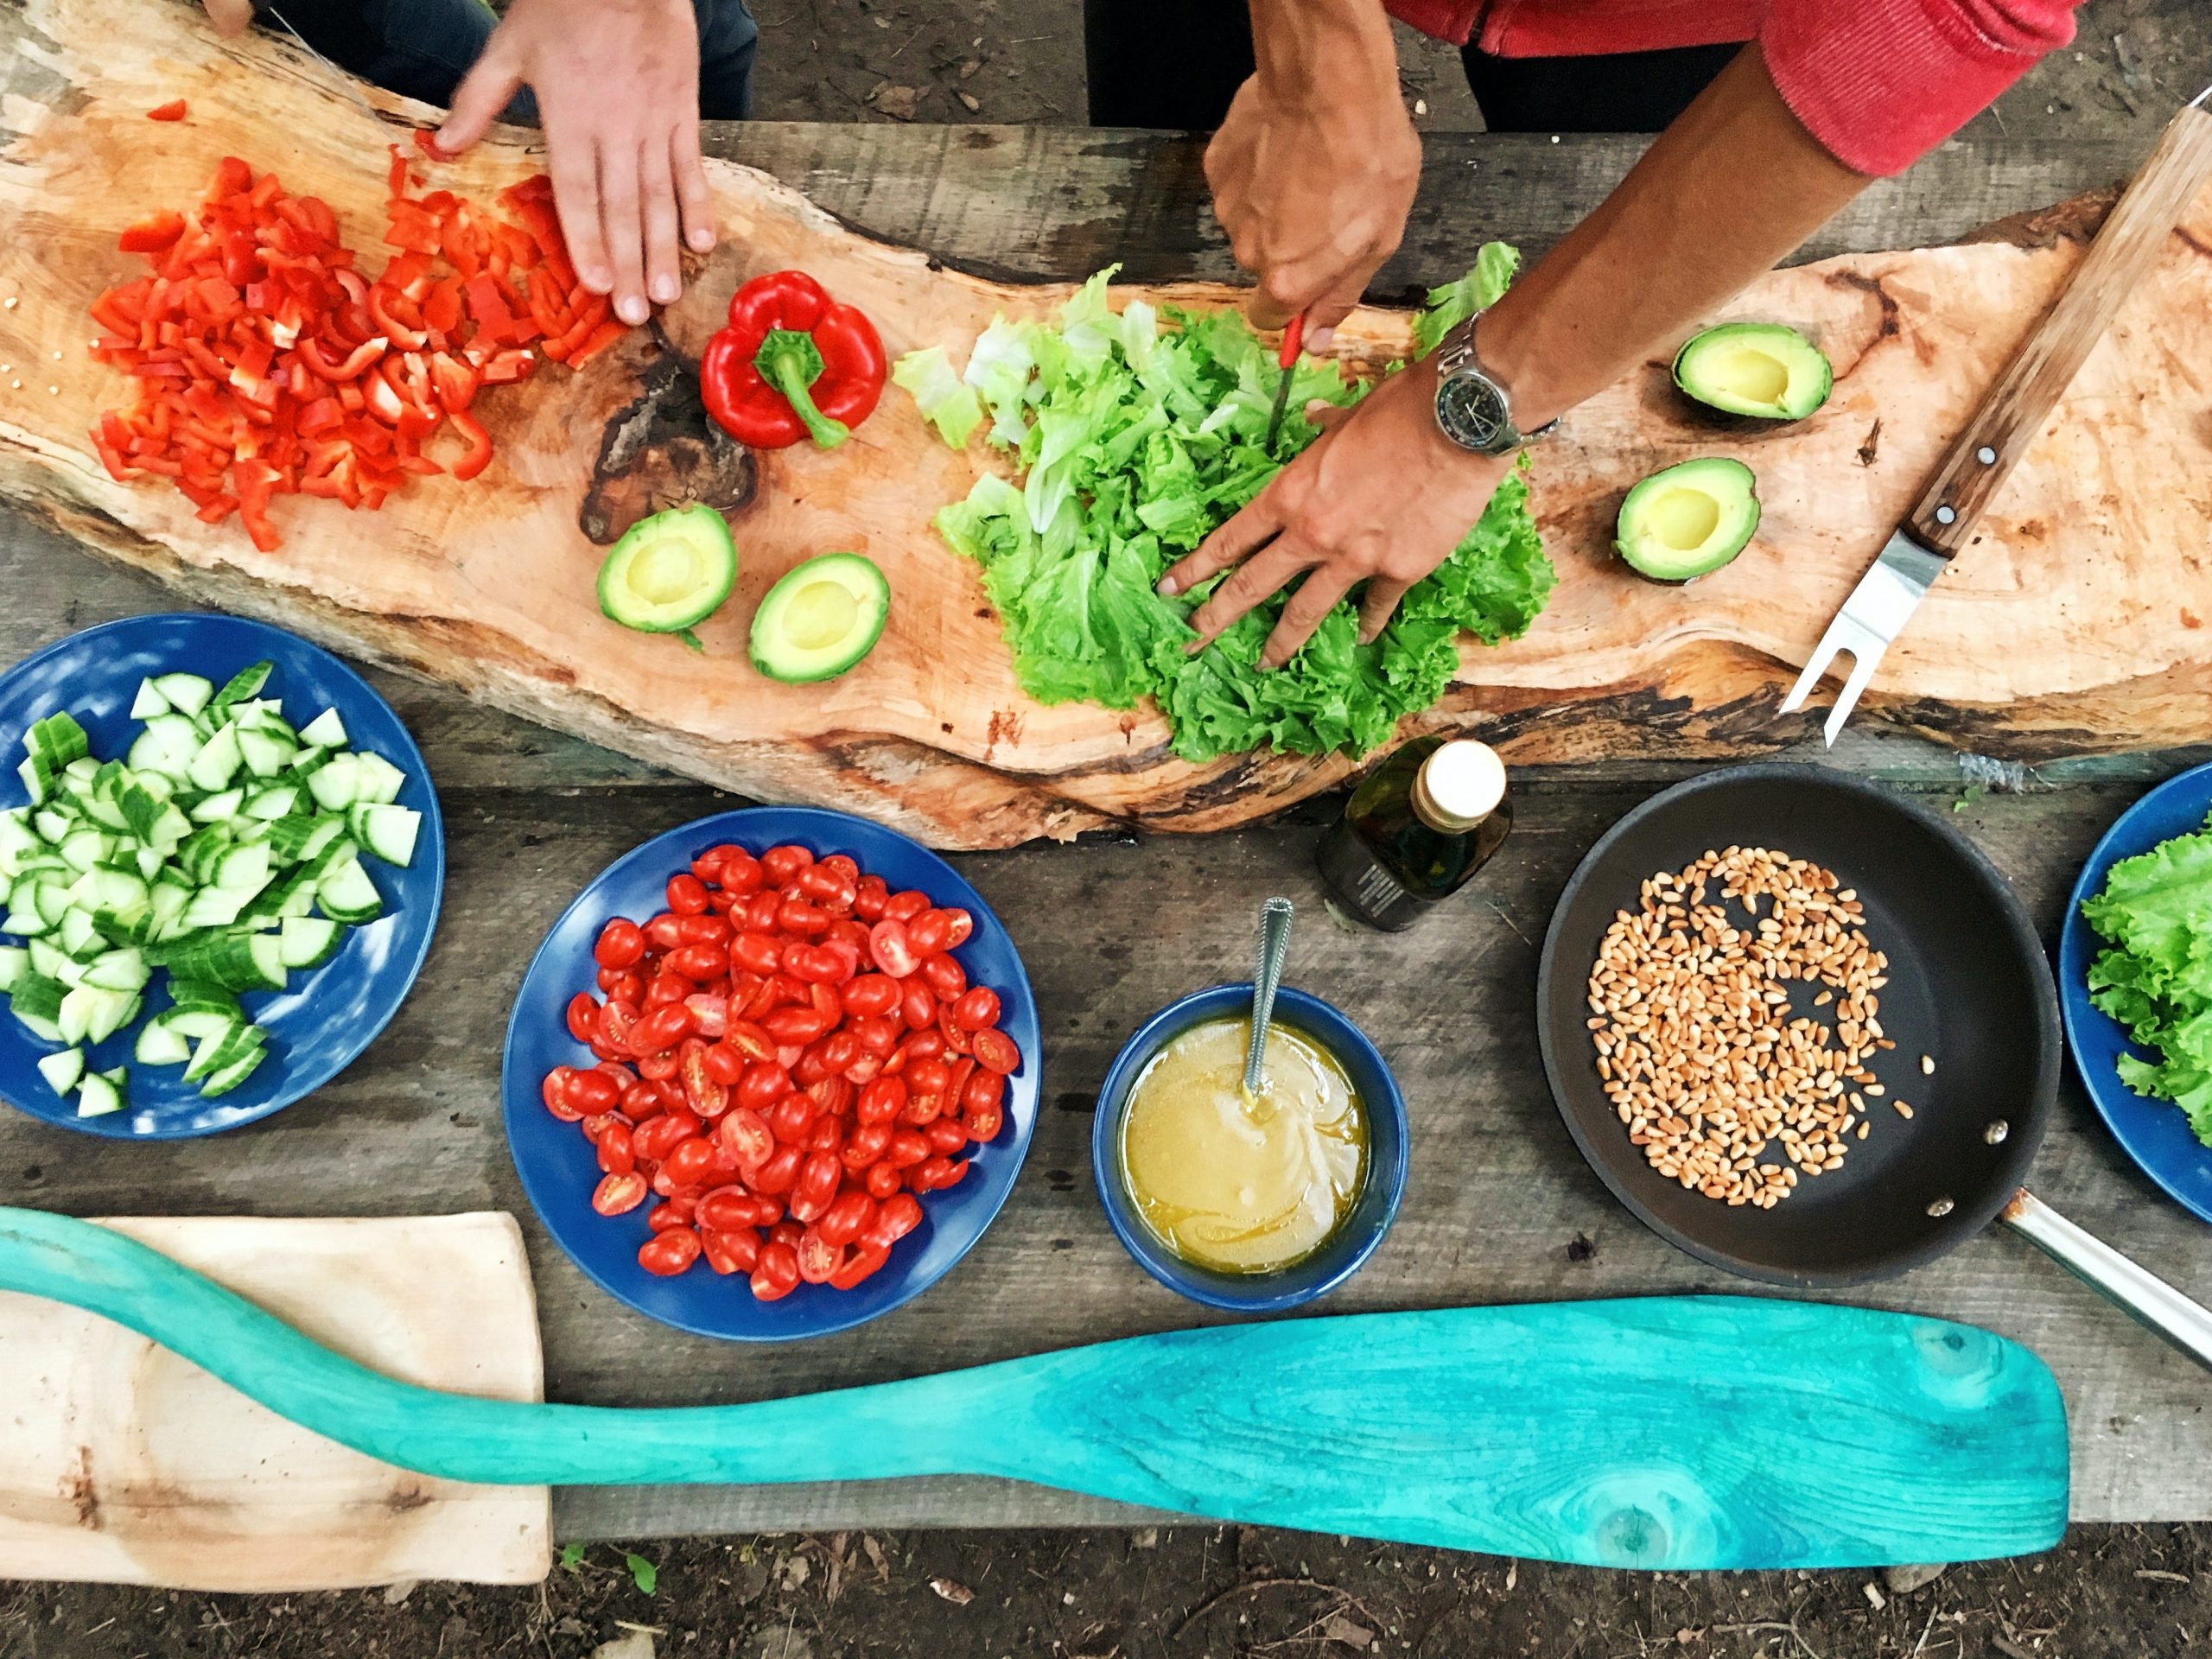 Two pairs of hands preparing food on a table filled with fresh ingredients.